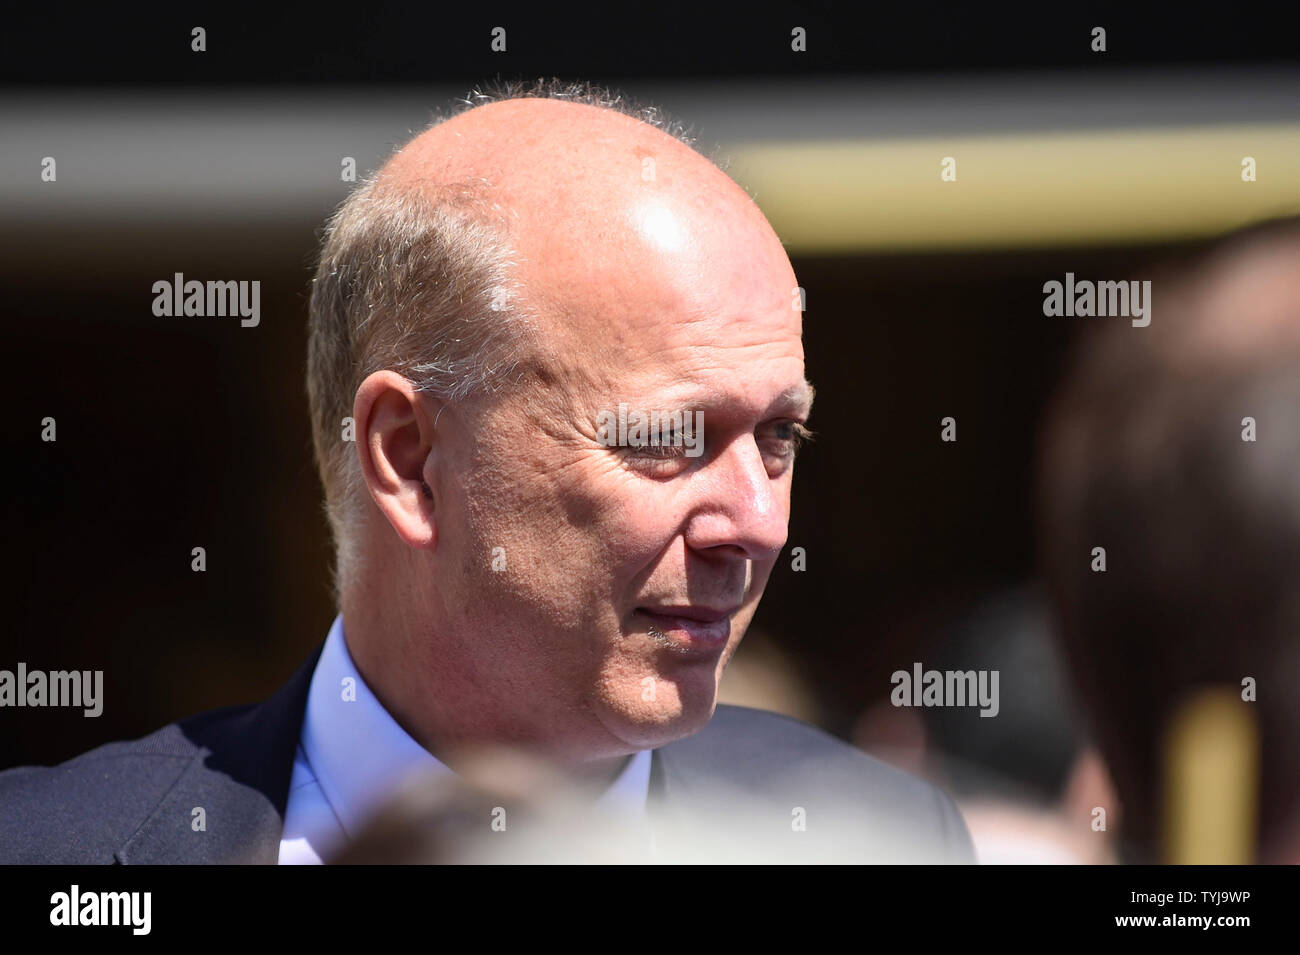 London, UK.  26 June 2019. Chris Grayling MP for Epsom and Ewell and Secretary of State for Transport meets people taking part in a 'Time Is Now' mass lobby around Parliament.  Activists are attempting to deliver a message to MPs that to tackle the environmental crisis, a strong Environment Bill is passed that can restore nature, cut plastic pollution and improve air quality.  Similar gatherings are taking place across the UK.  Credit: Stephen Chung / Alamy Live News Stock Photo